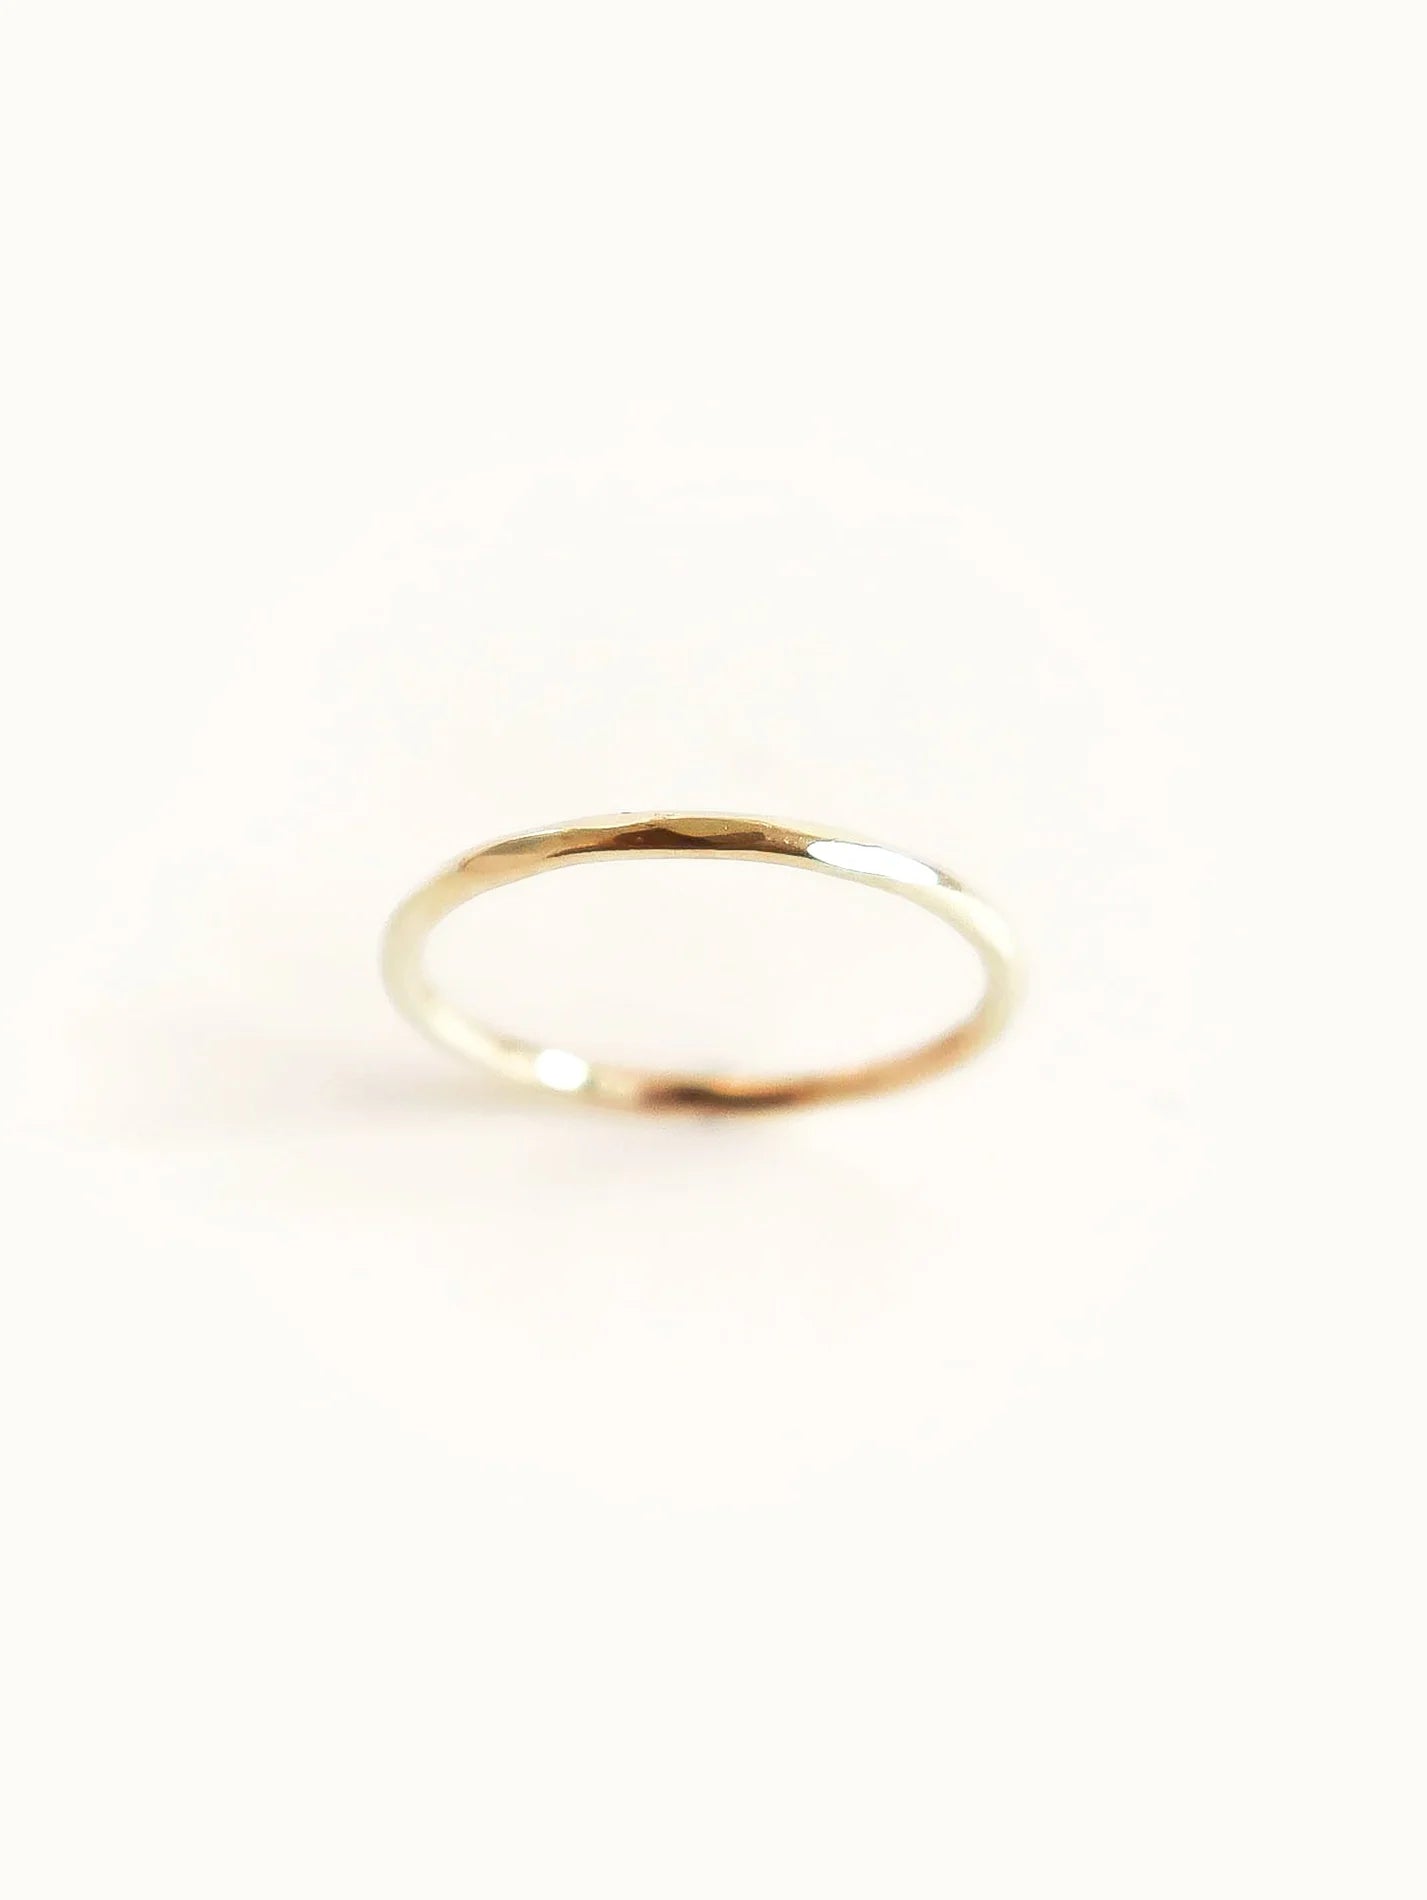 Hammered stacking ring